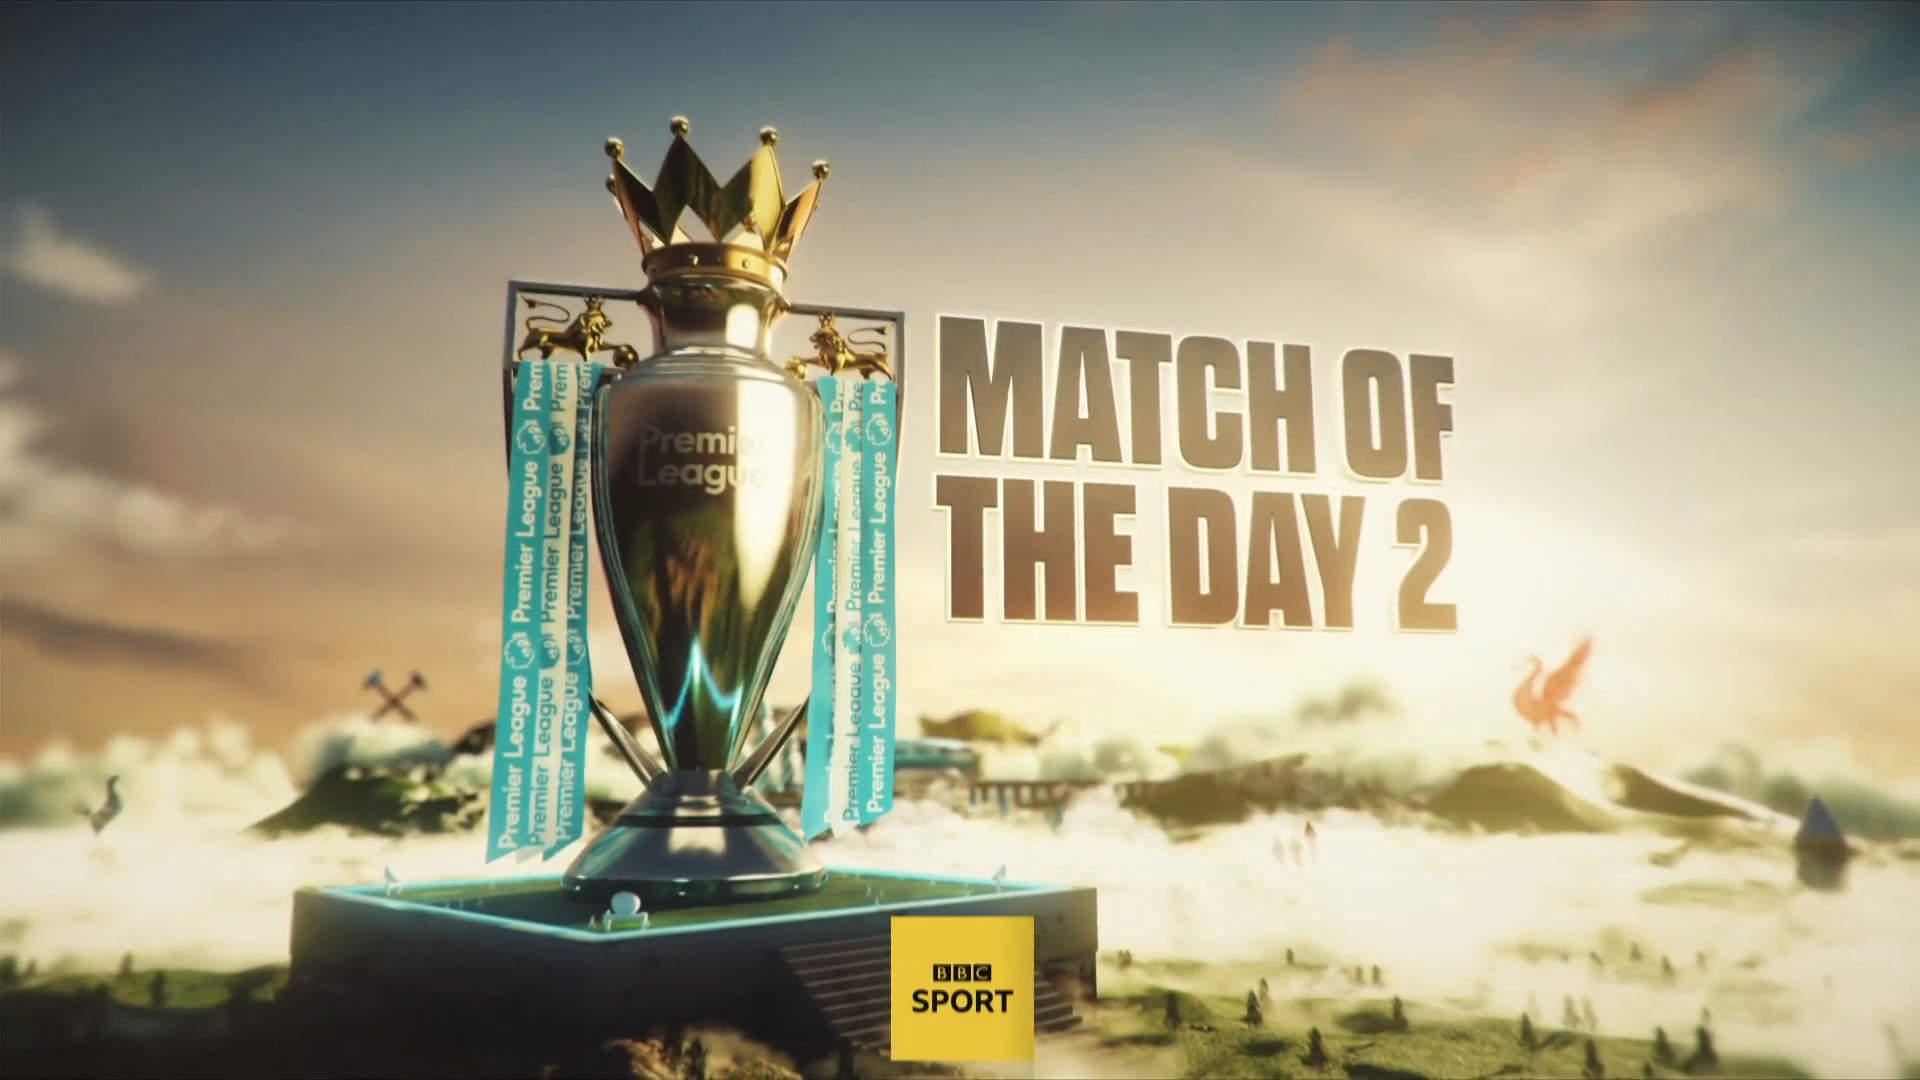 Premier League - Match of the Day 2 - Matchday 13 - 24/11/2019